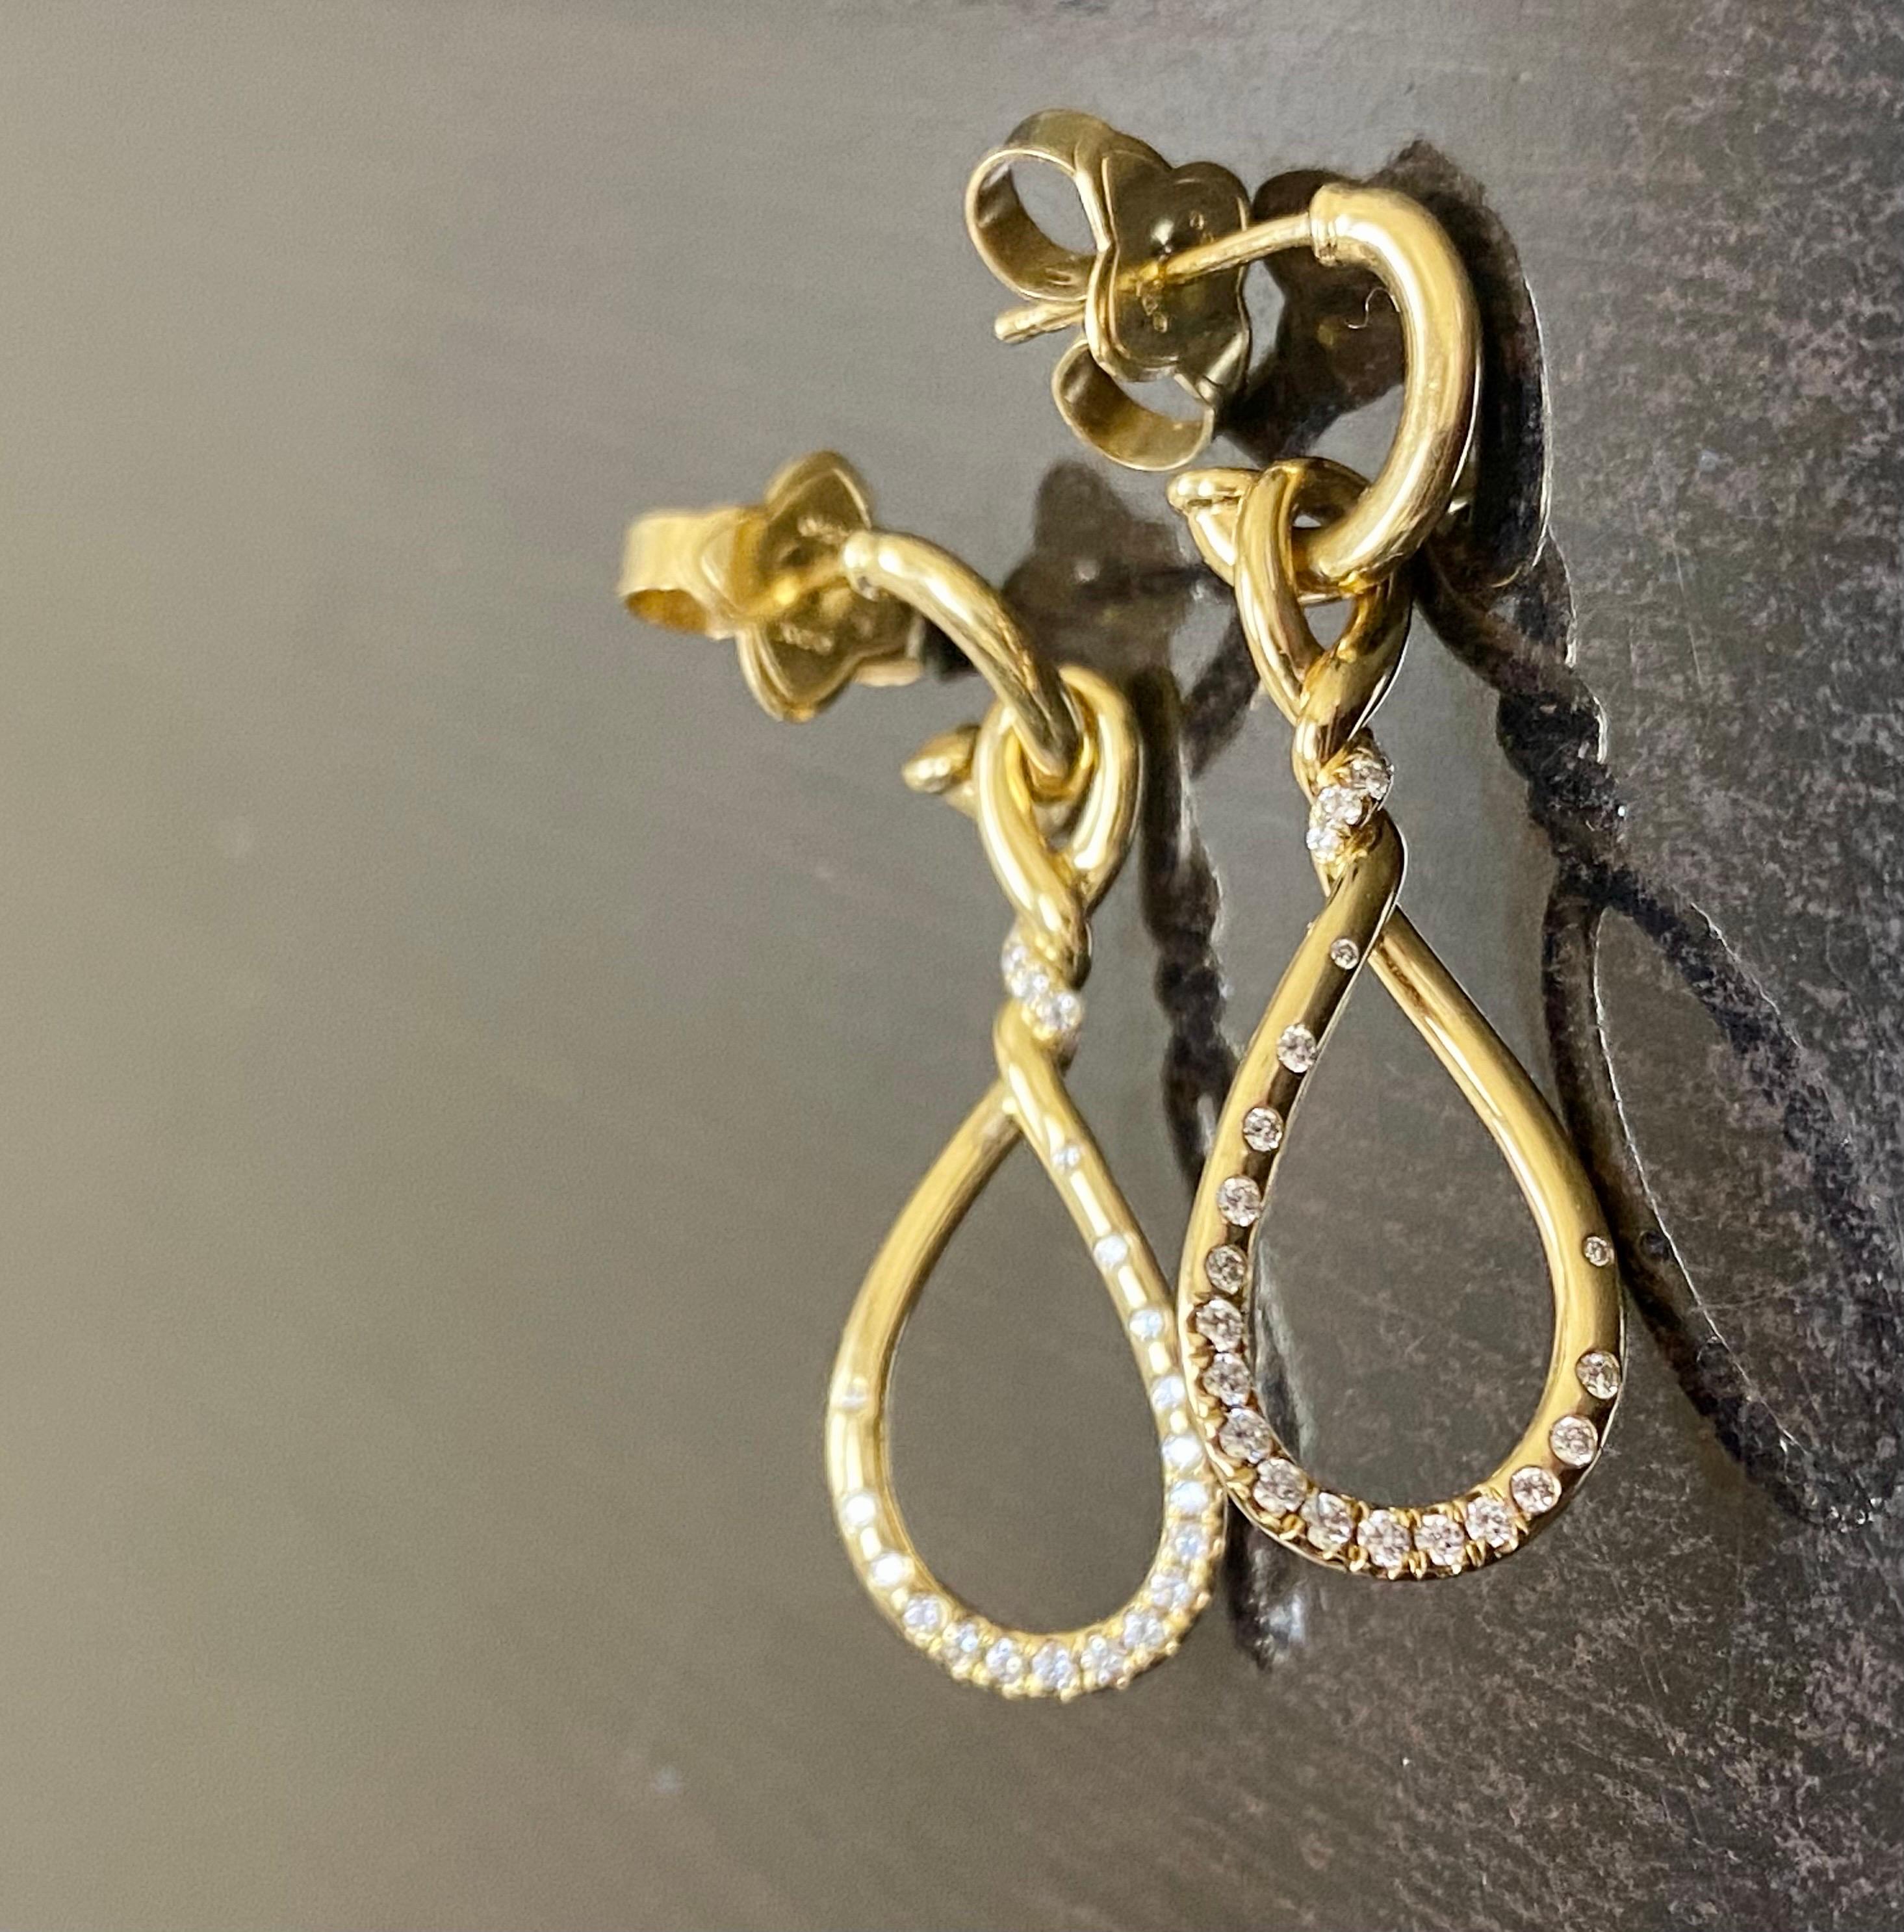 David Yurman Twisted 18K Yellow Gold Continuance Diamond Drop Earrings In Excellent Condition For Sale In Los Angeles, CA